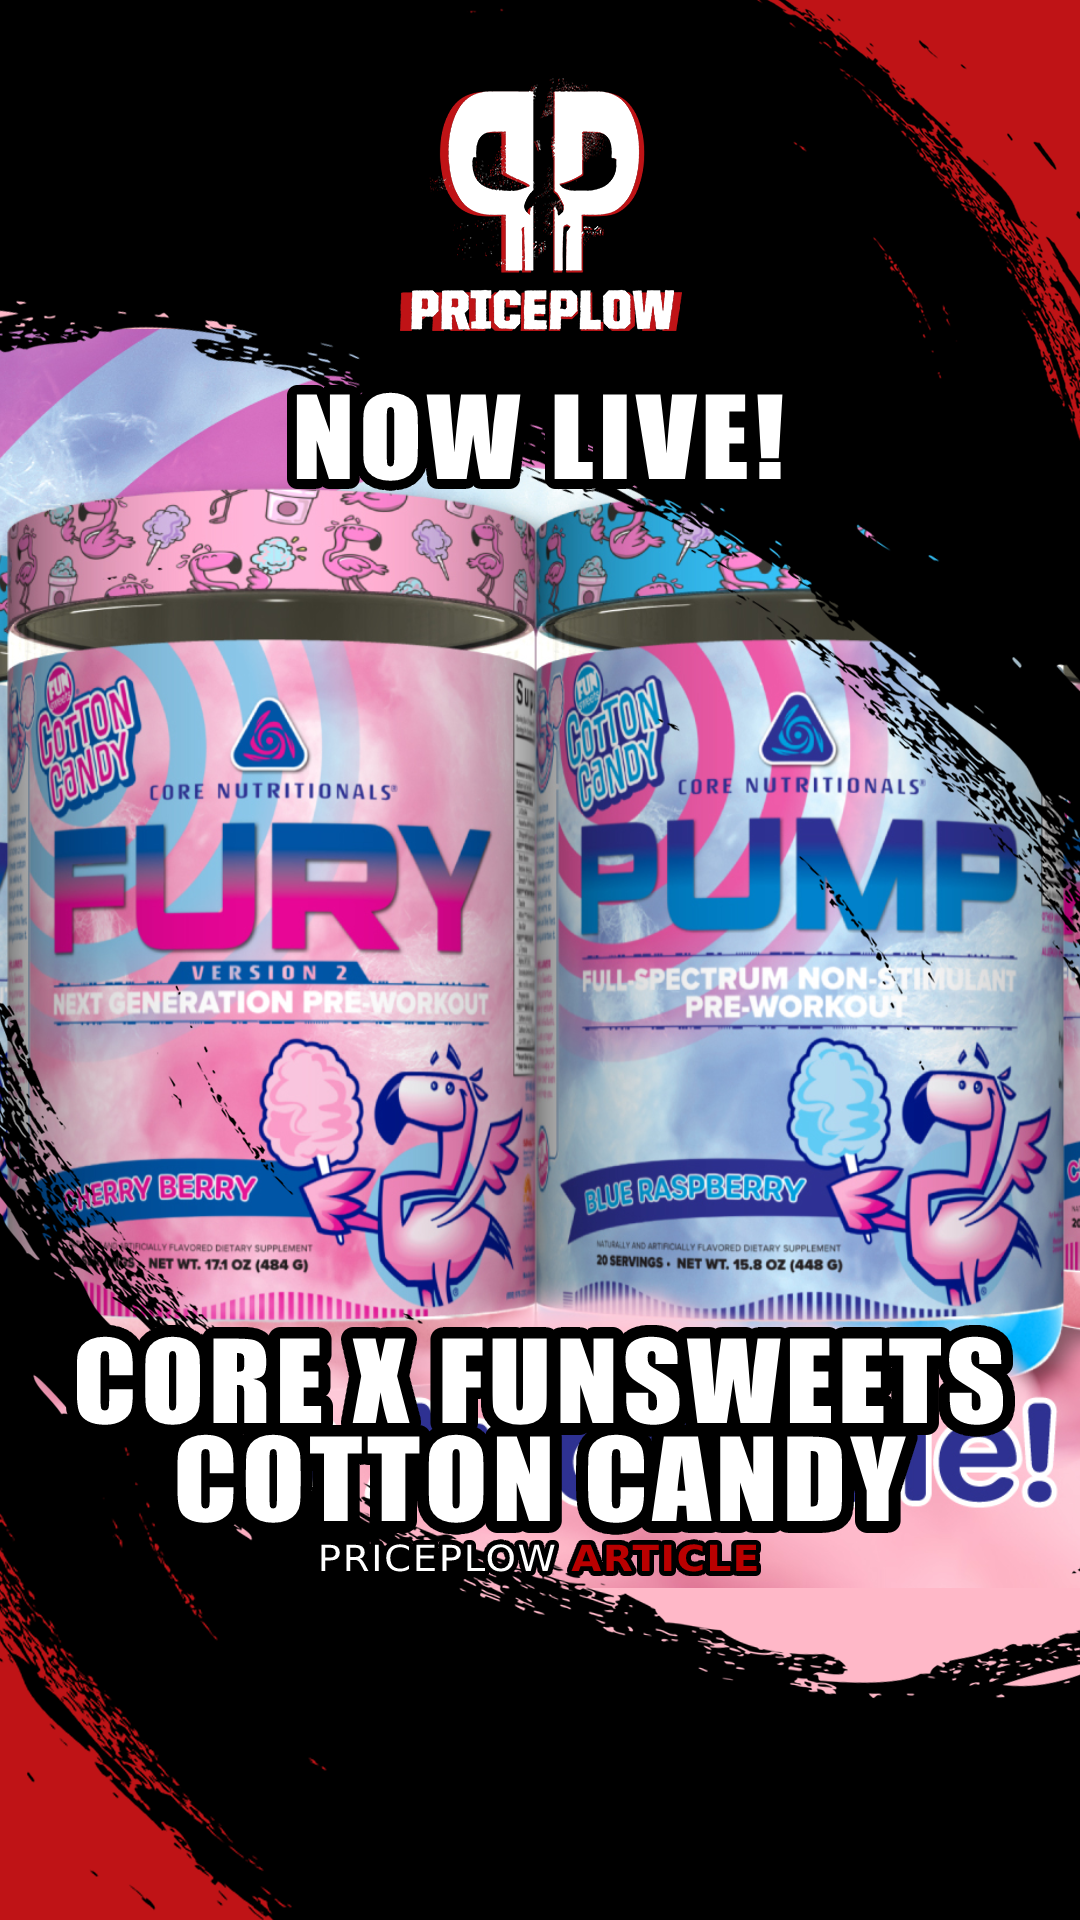 CORE Nutritionals X Funsweets is now available!